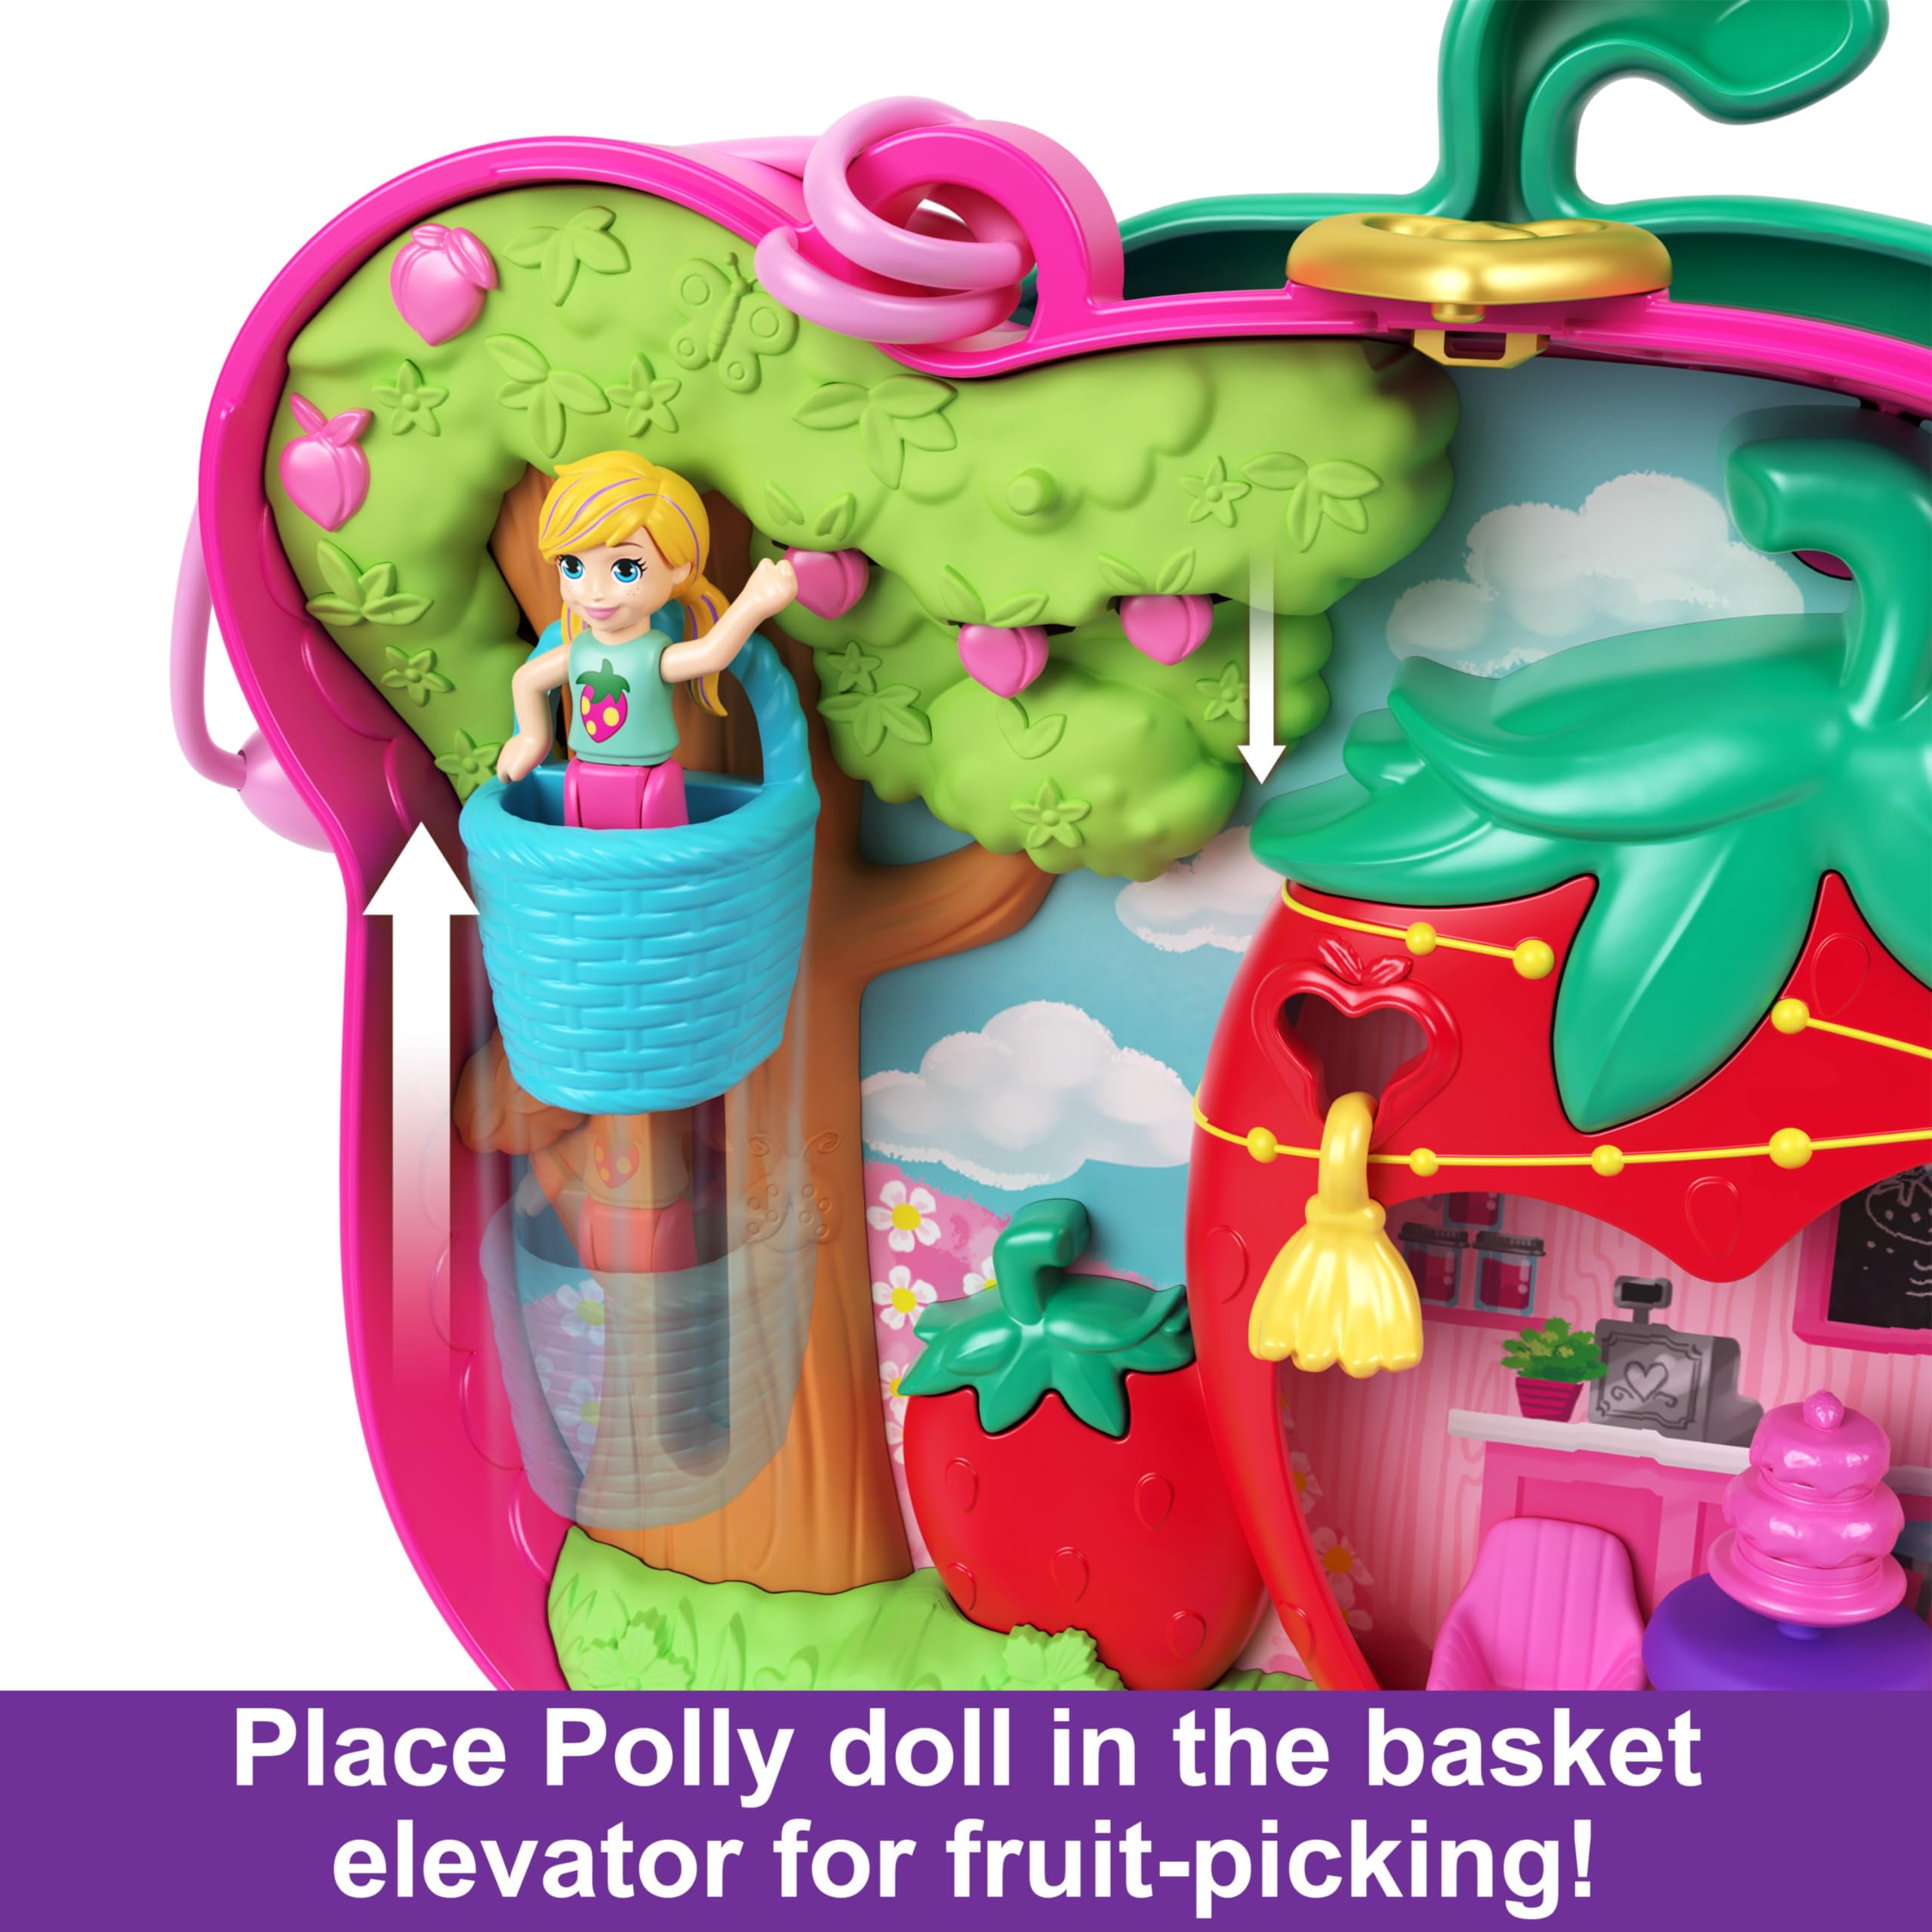 Polly Pocket Dolls and Playset, Travel Toy with Fidget Exterior, Straw-beary Patch Compact with 12 Accessories